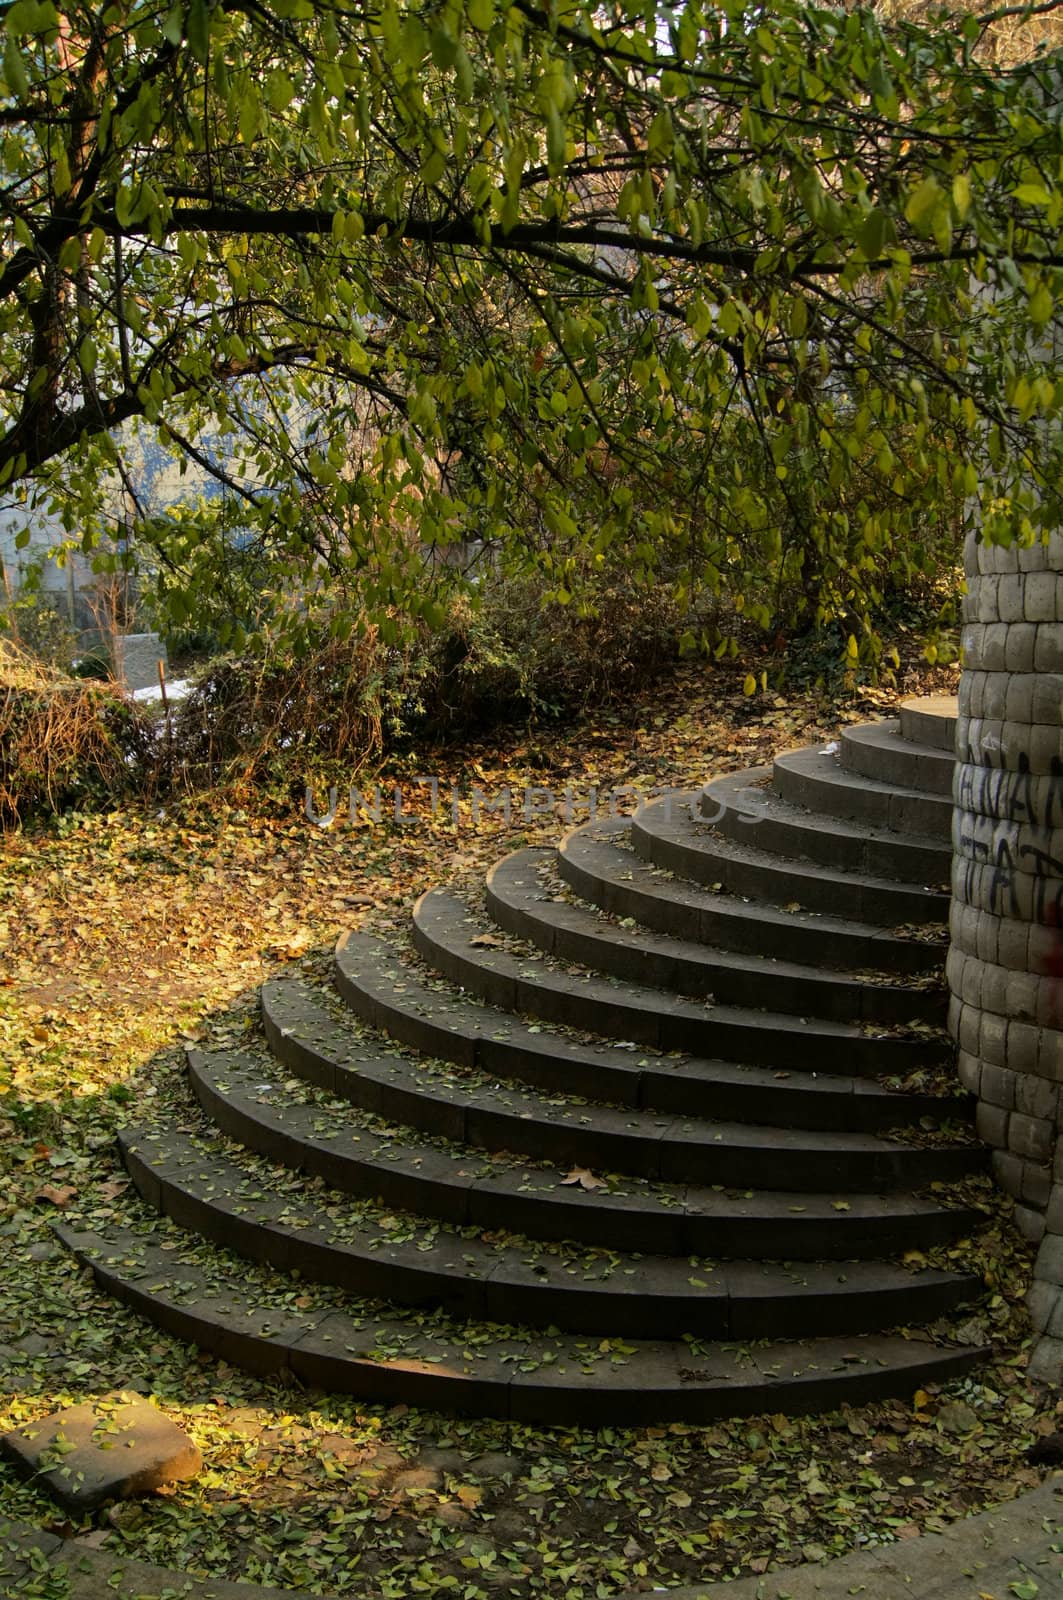 Steps in the one of the most popular park in Tbilisi - Mziuri or Sunny park in Vake area, Tbilisi, Republic of Georgia